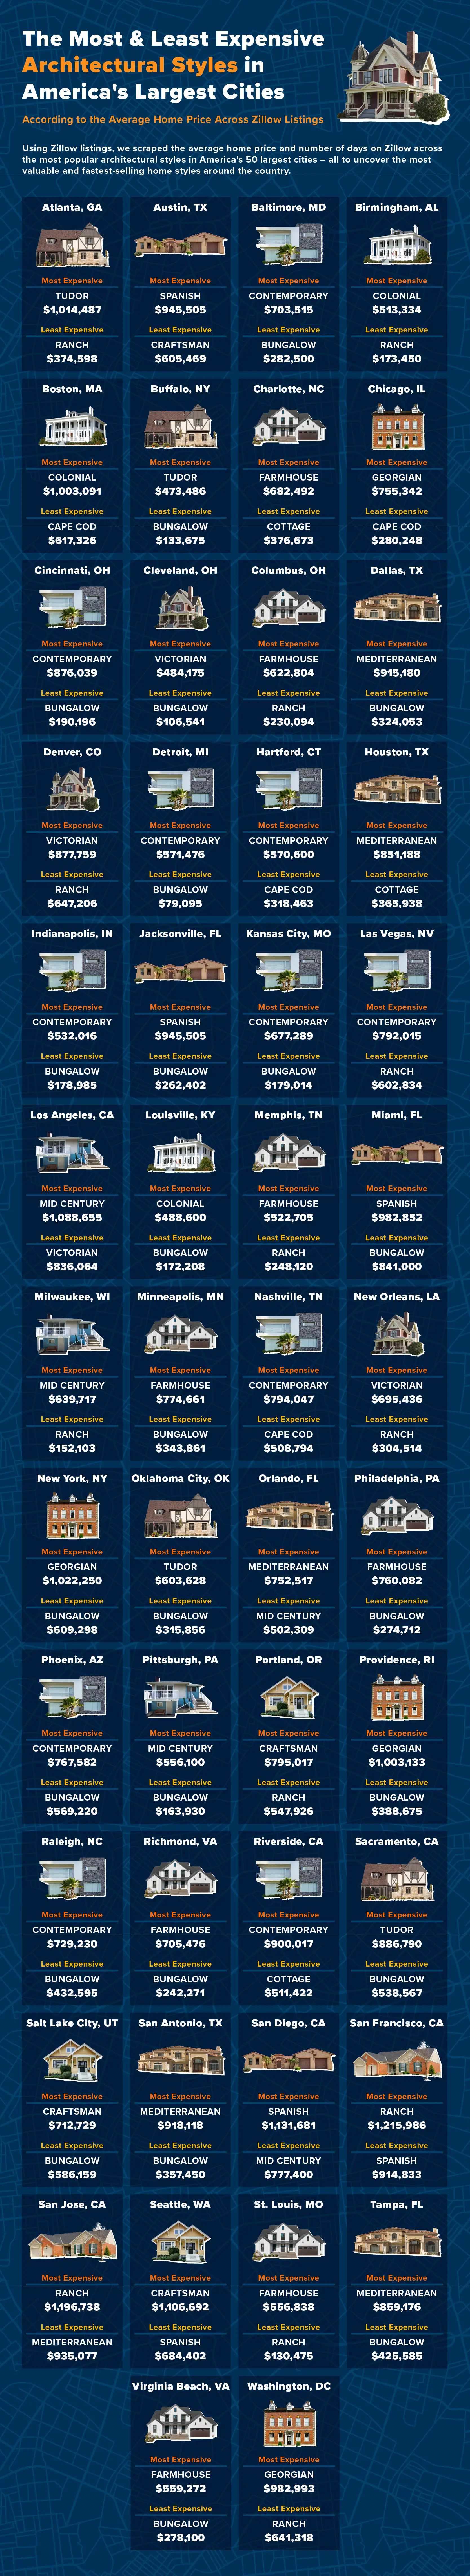 An infographic showing the most and least expensive home styles in 50 U.S. cities.